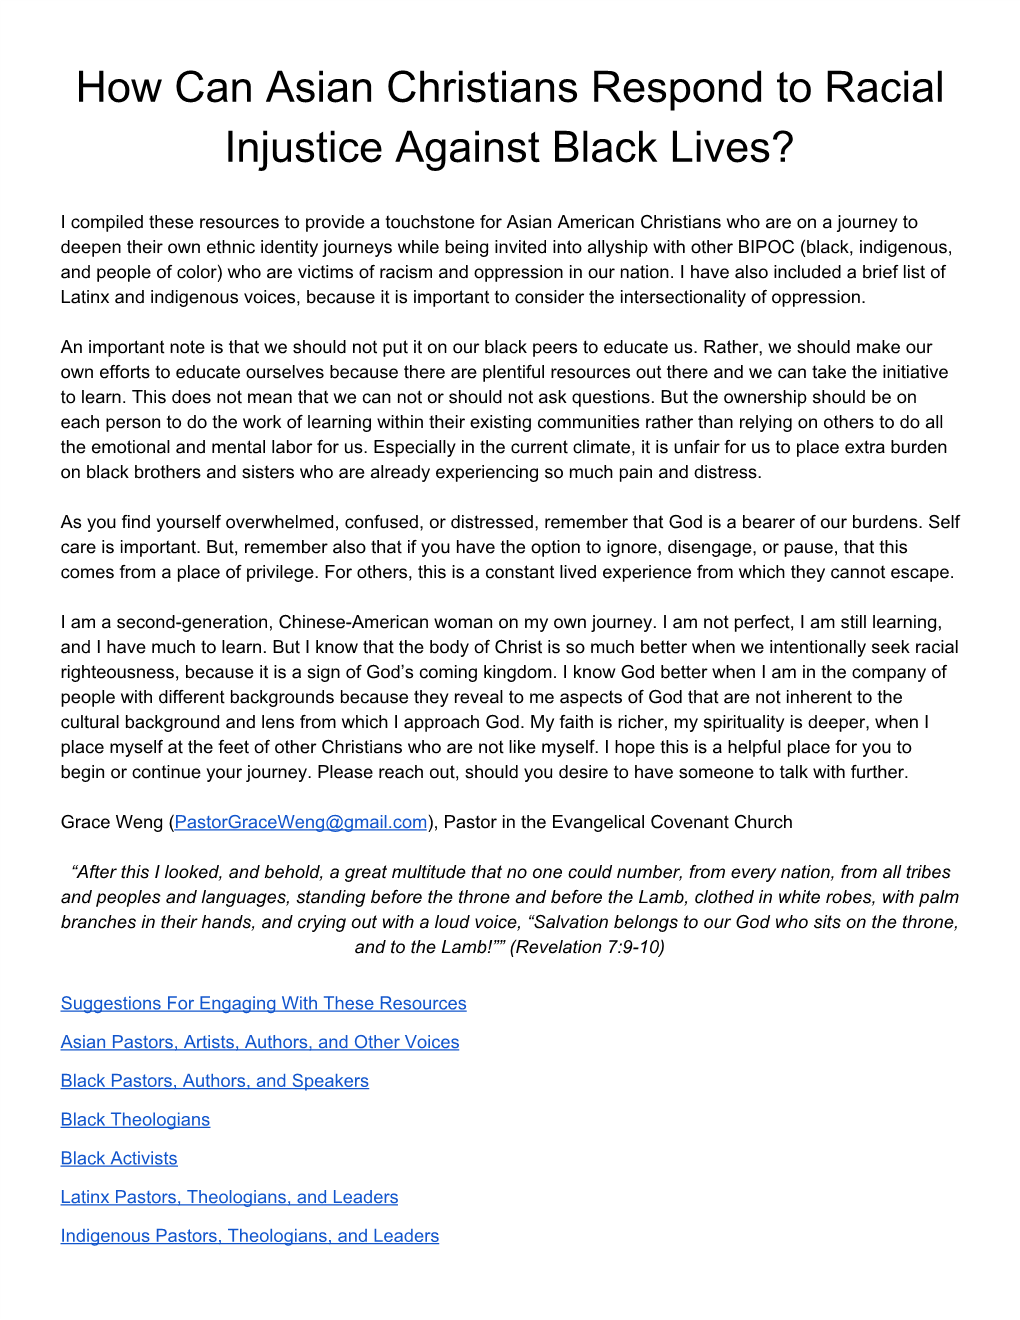 Asian Christian for Black Lives Resources